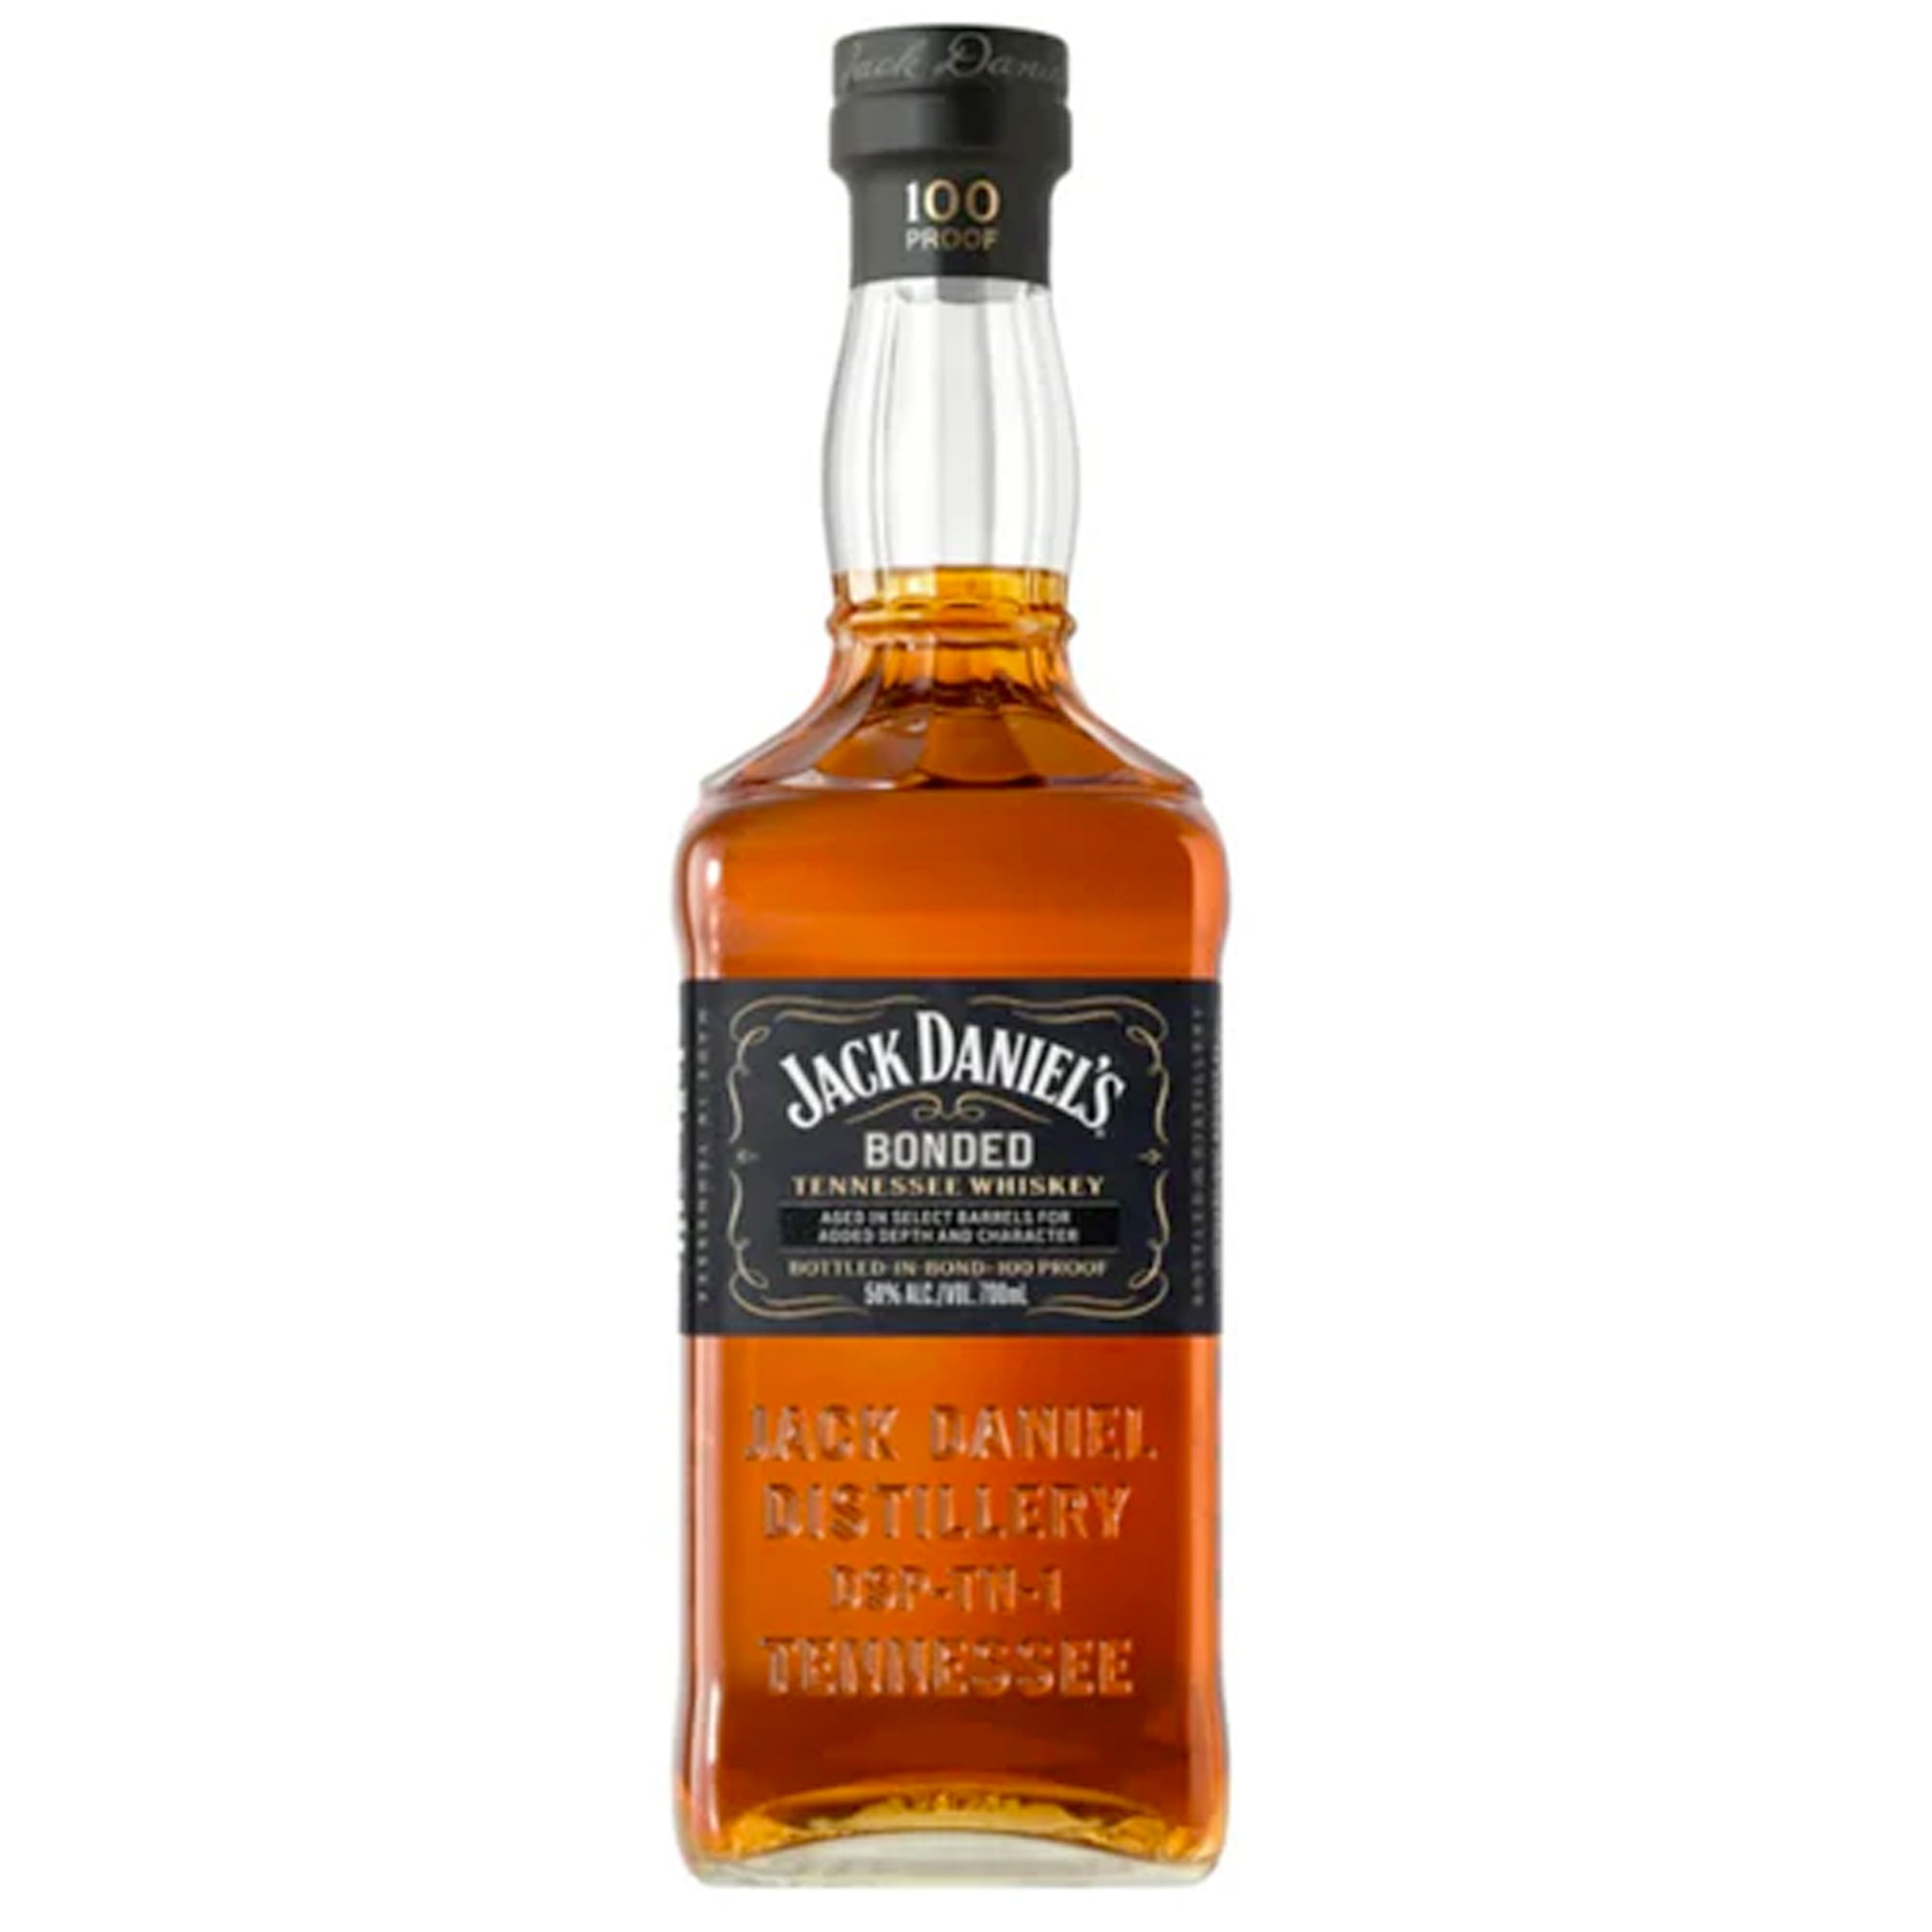 Jack Daniel's Bonded 100 Proof Tennessee Whiskey